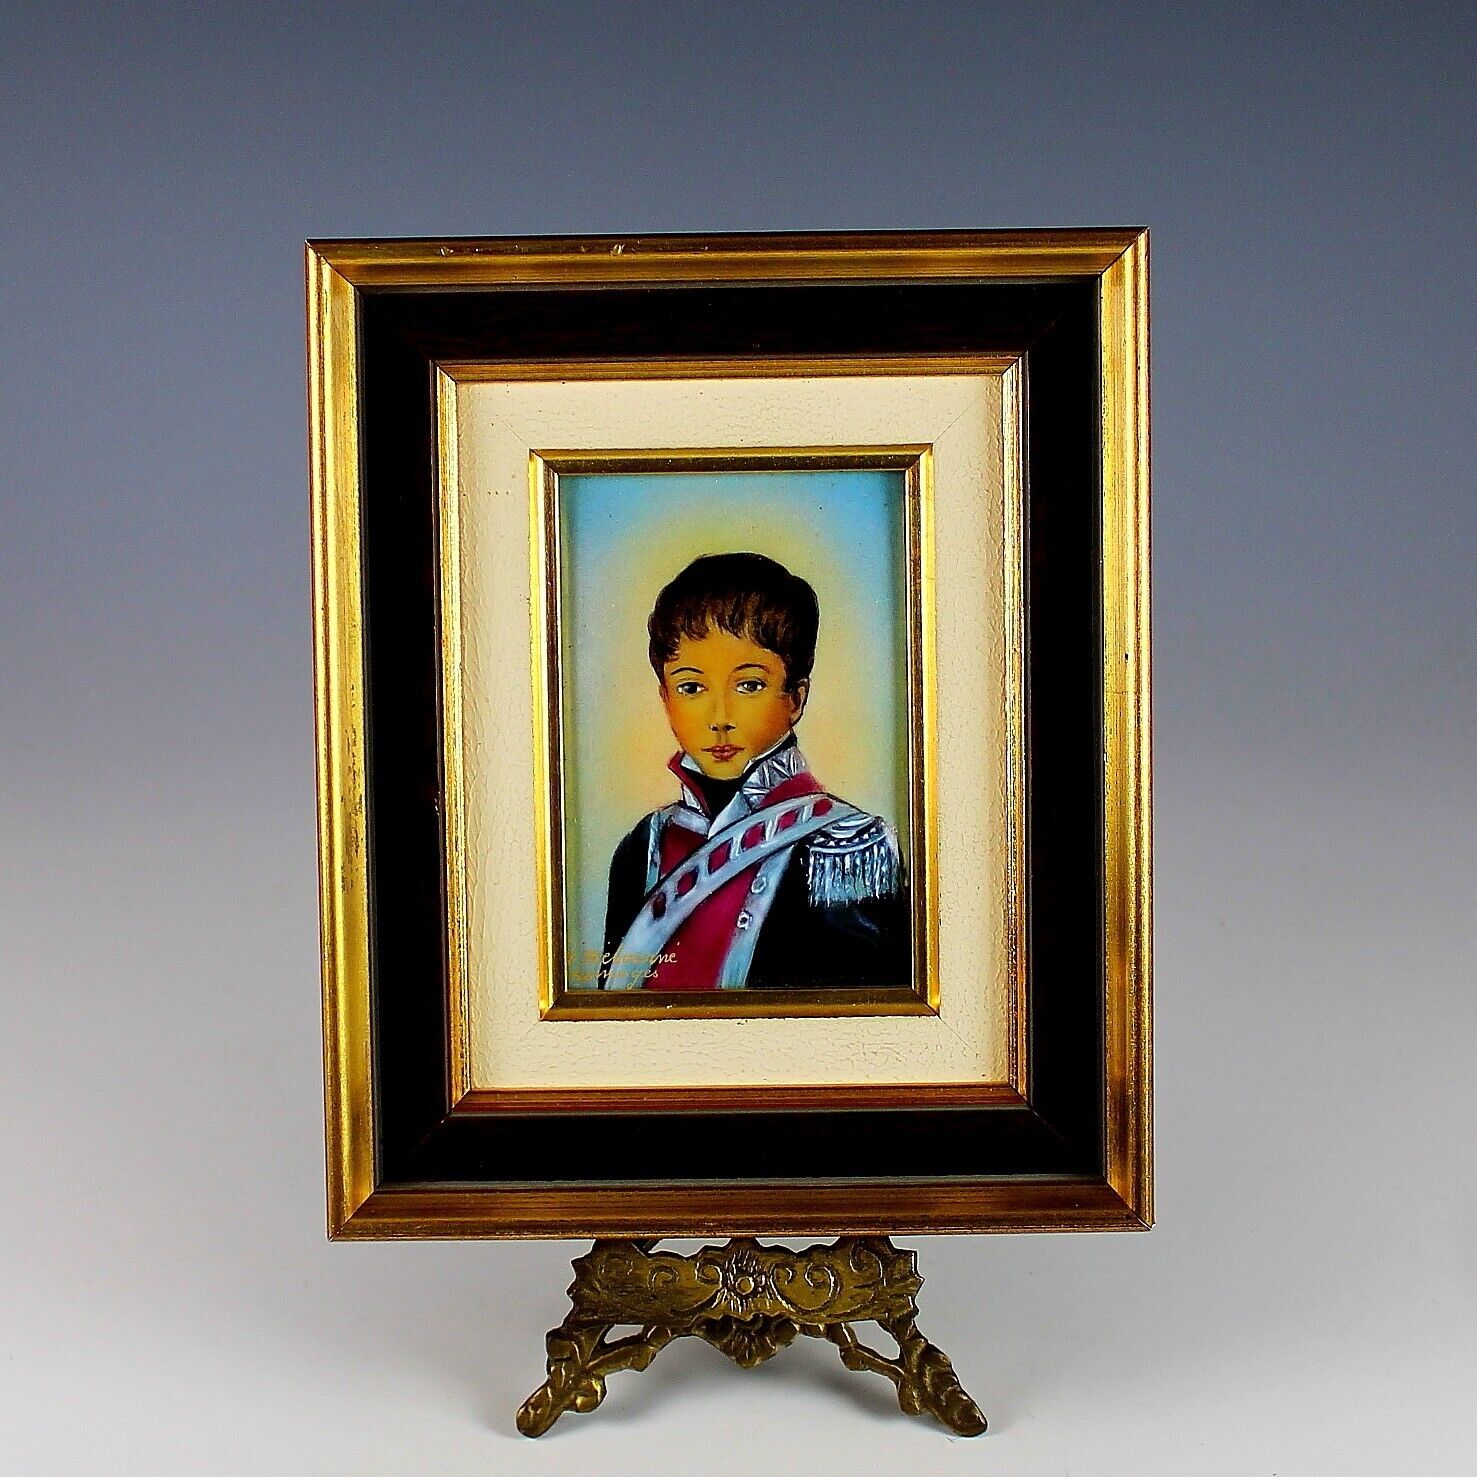 Antique French Enamel Miniature Painting of a Young Cadet